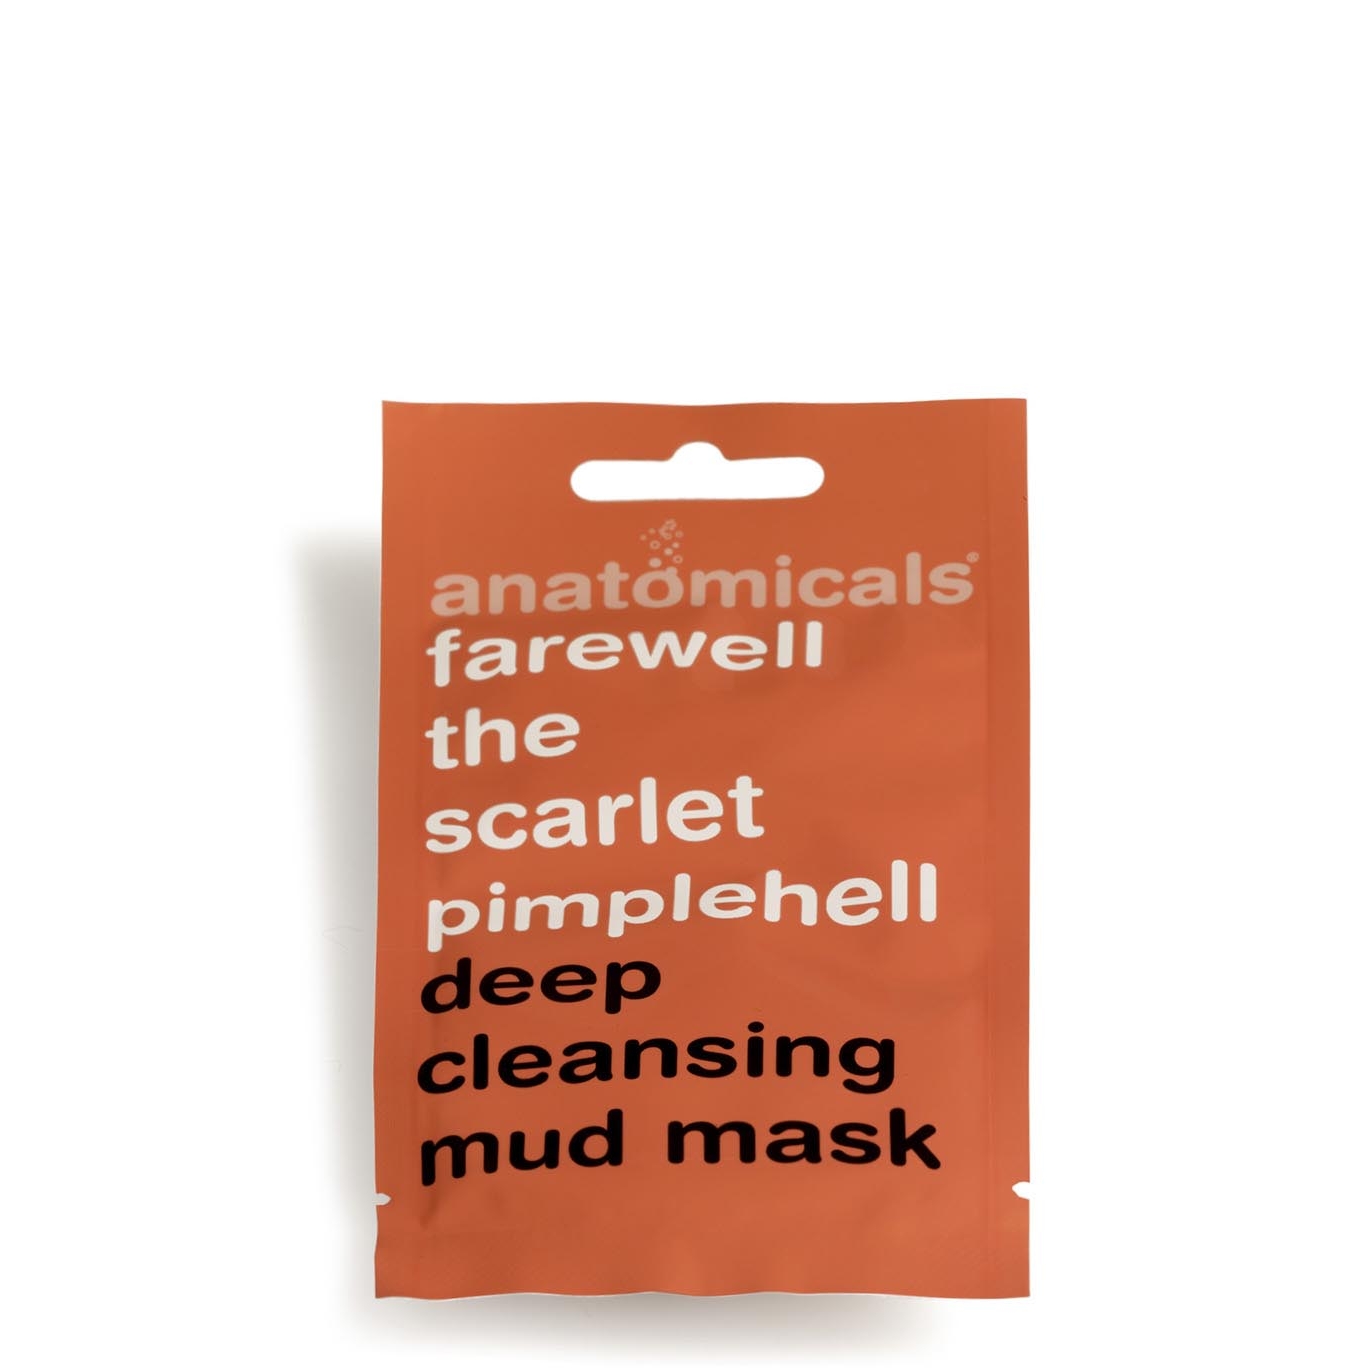 Anatomicals Farewell The Scarlet Pimplehell Deep Cleansing Mud Mask